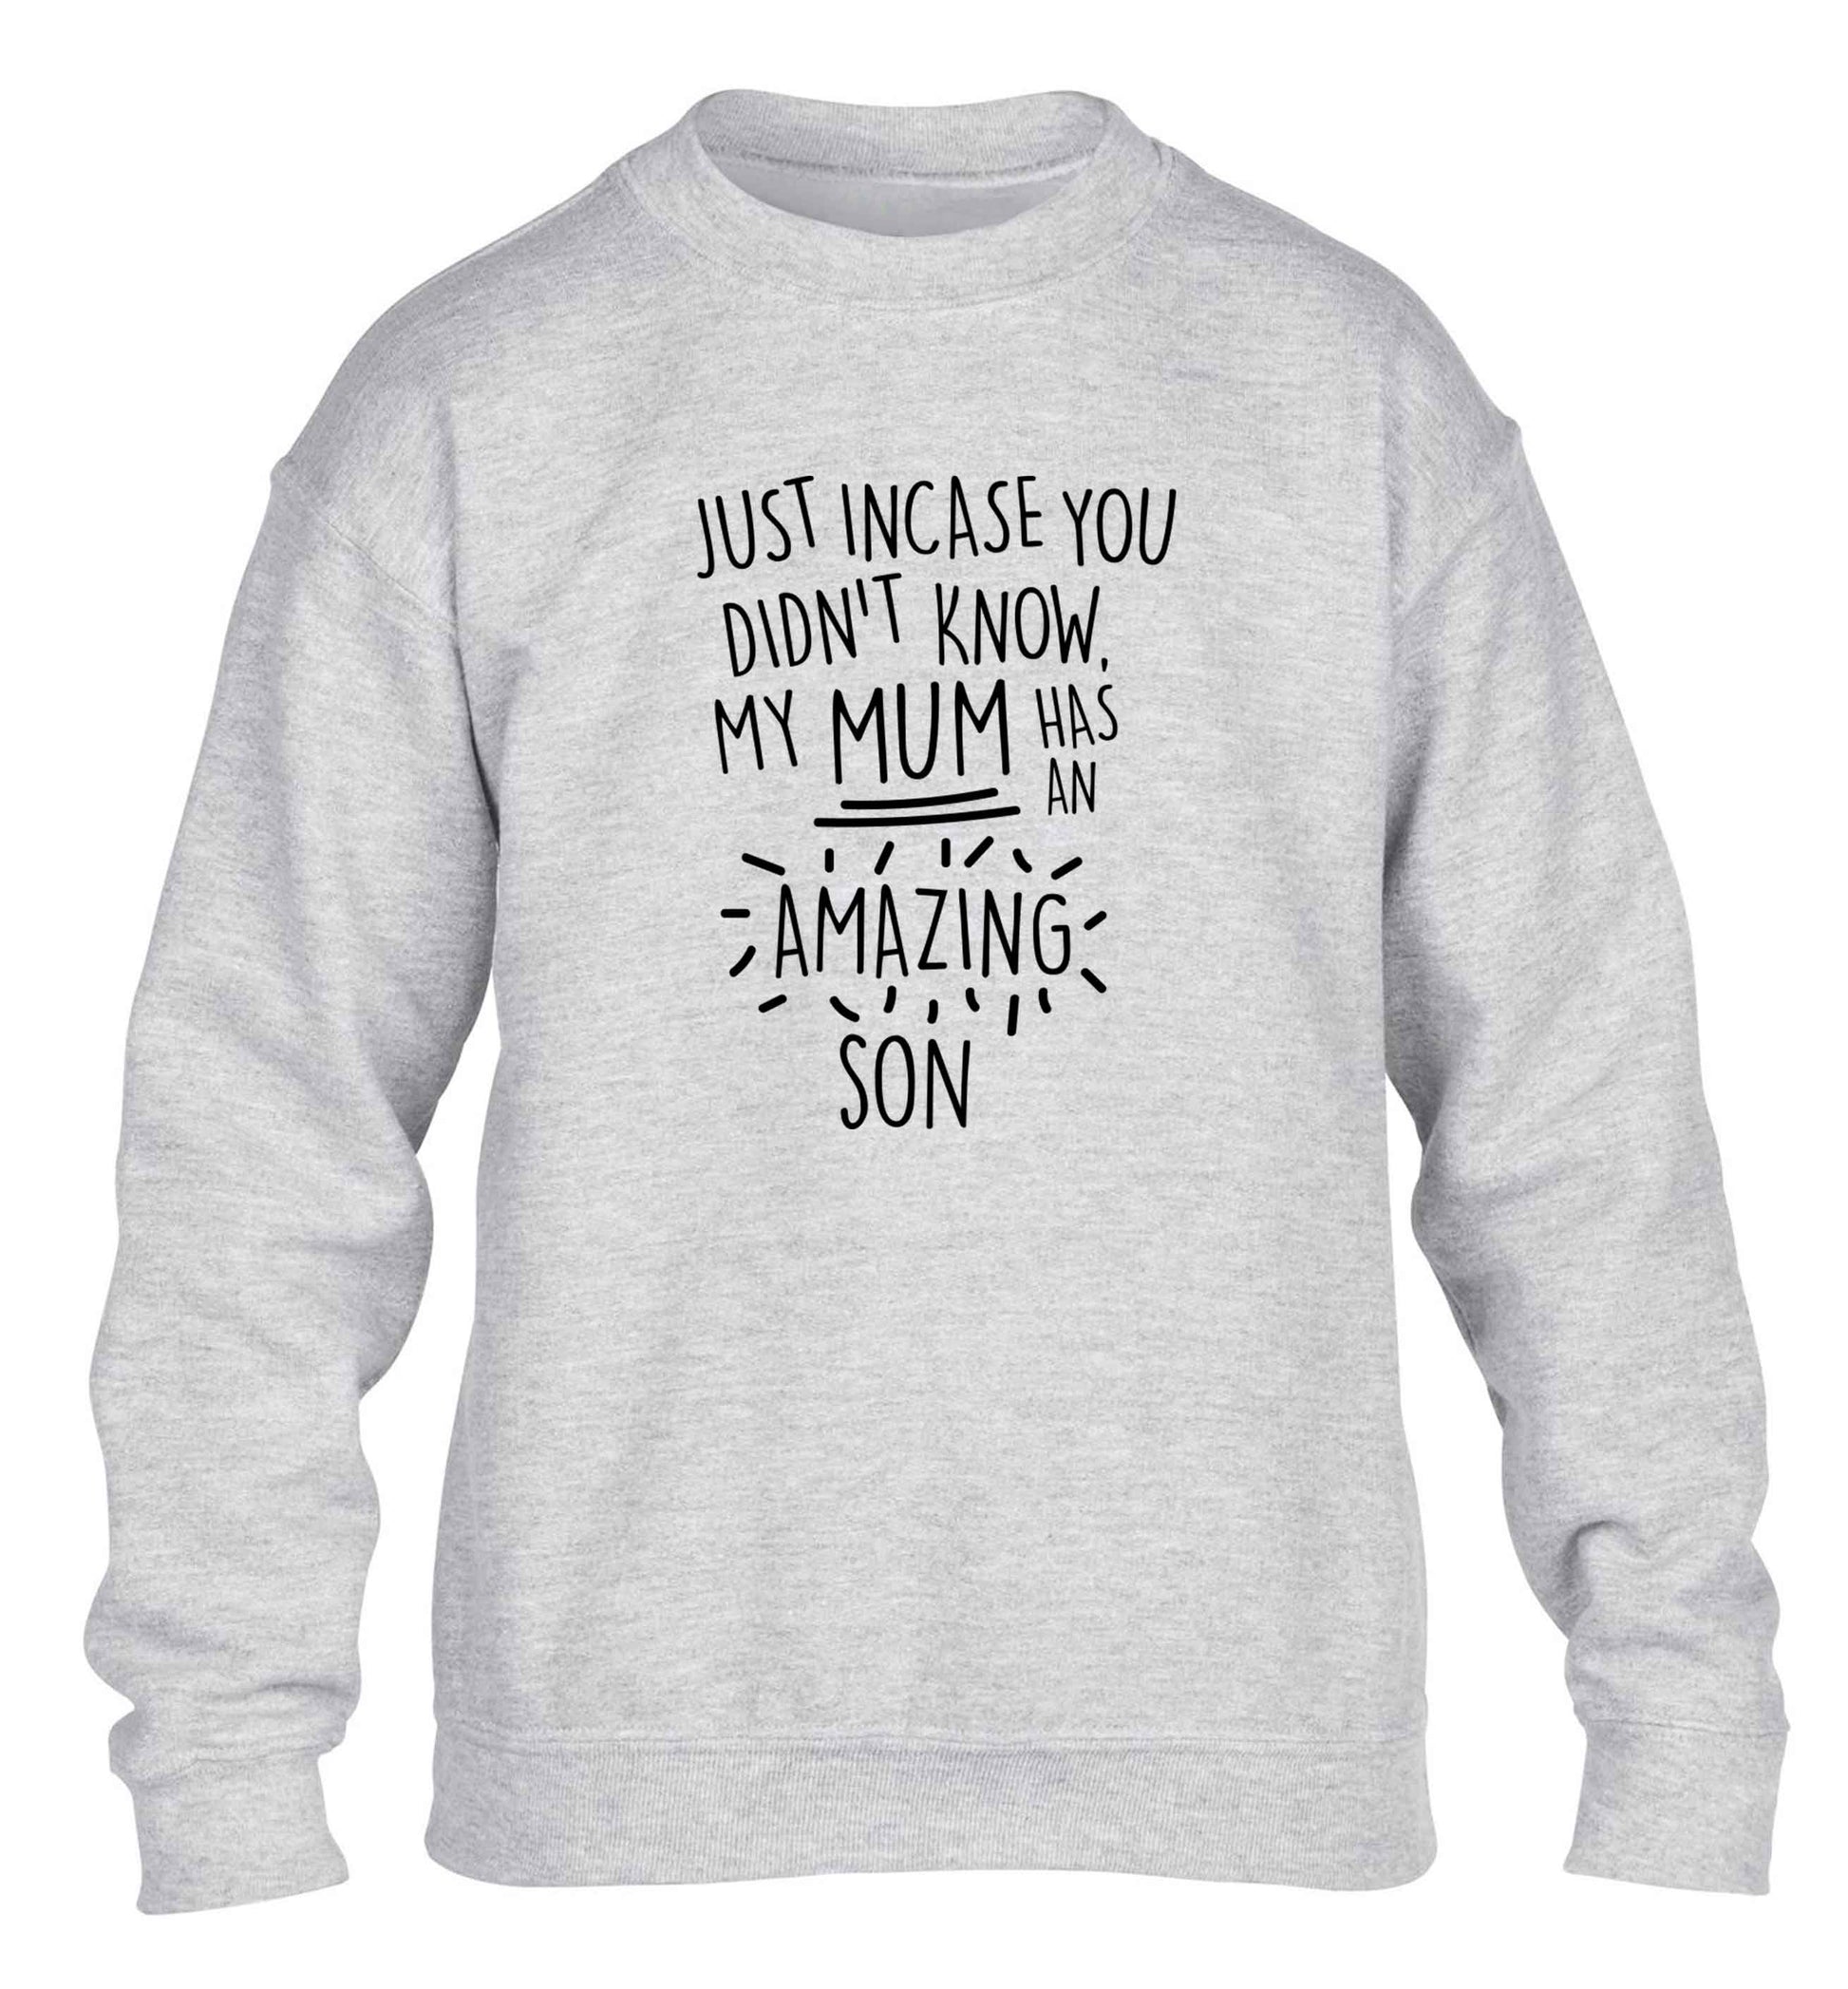 Just incase you didn't know my mum has an amazing son children's grey sweater 12-13 Years